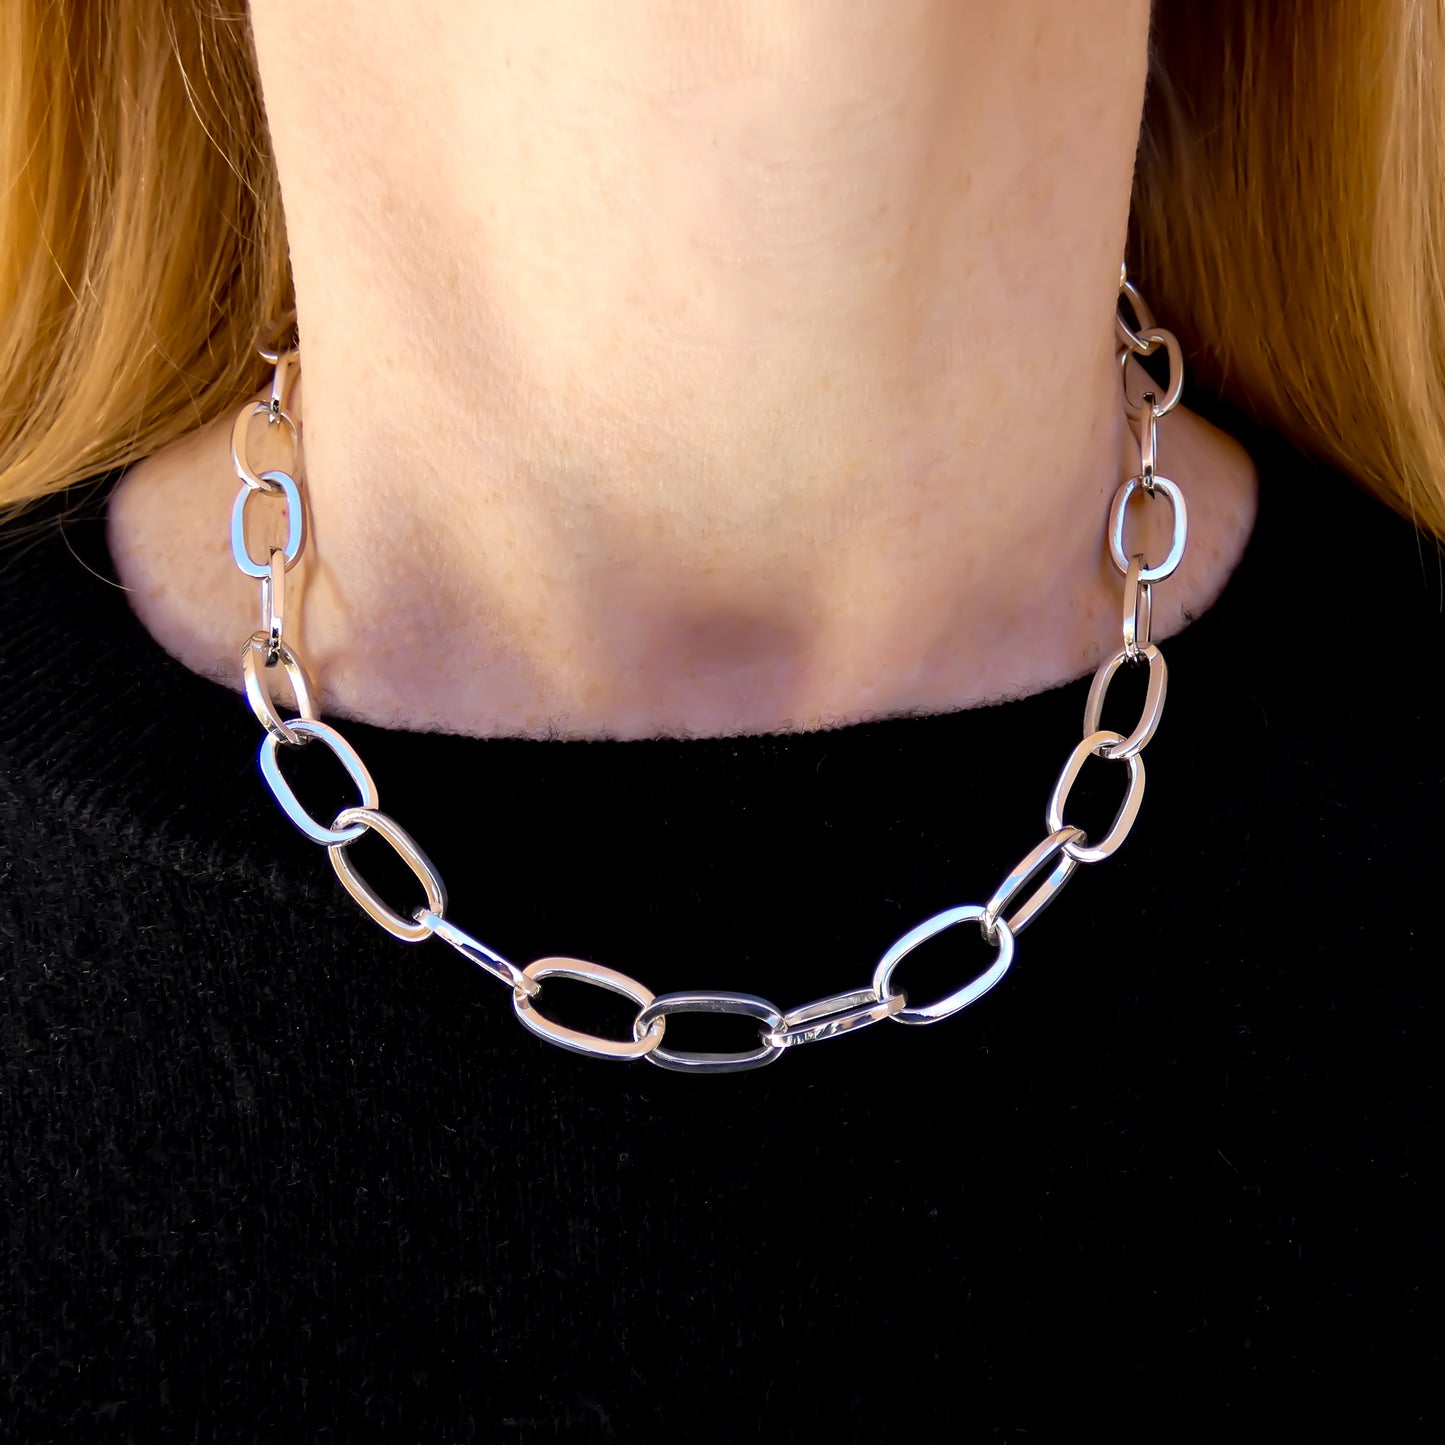 N730 .925 Sterling Silver Oval Chain Link Bali Necklace